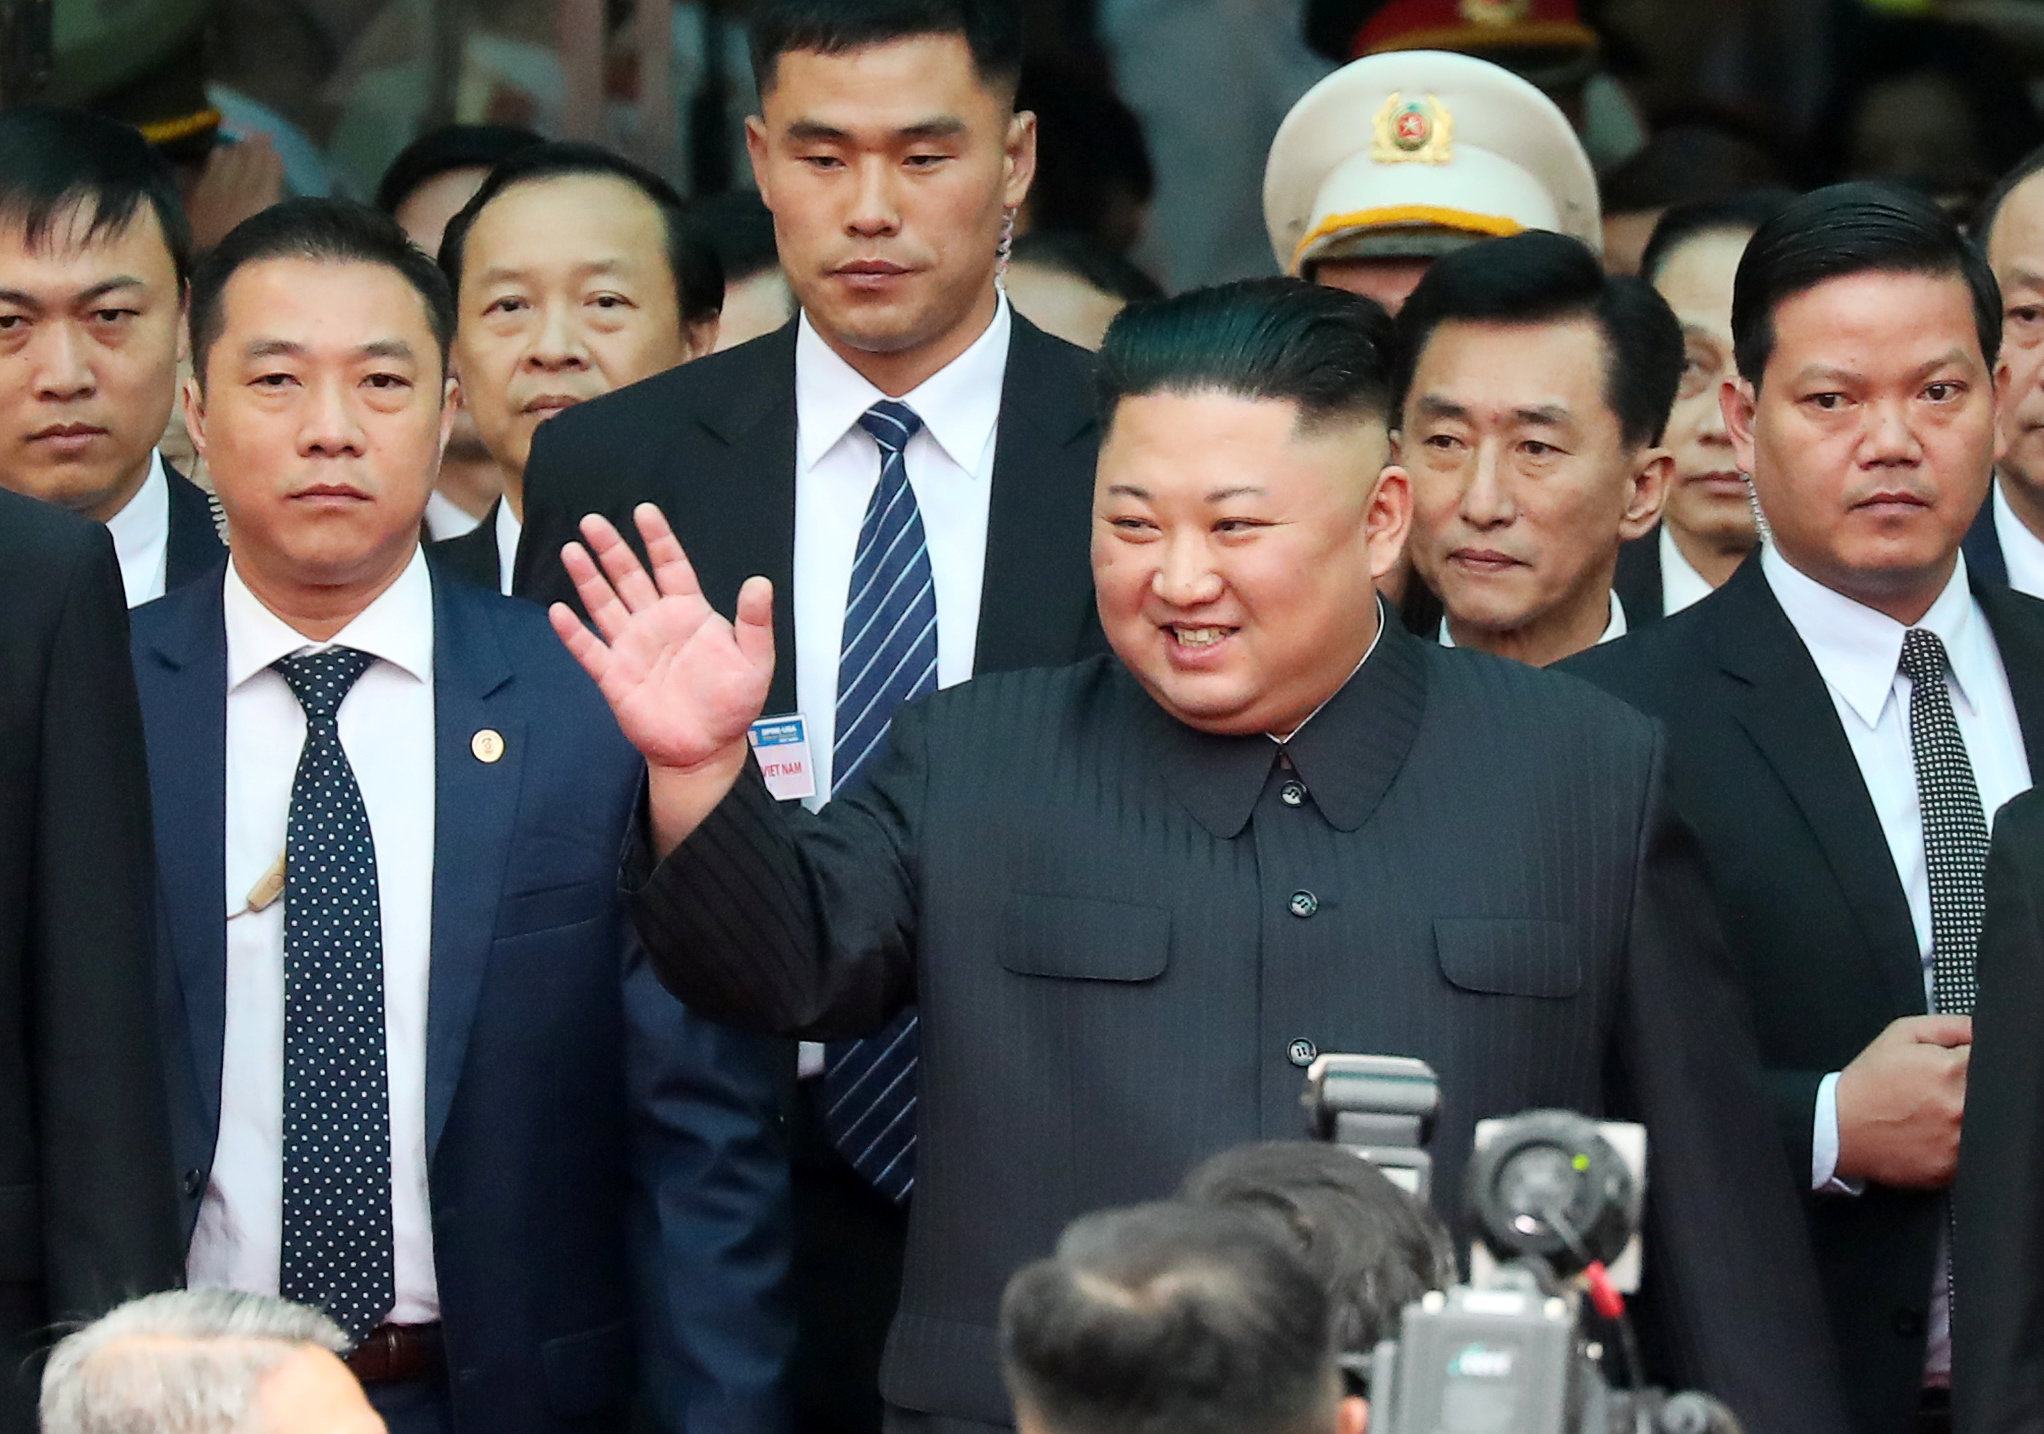 North Korea's leader Kim Jong Un waves as he arrives at the Dong Dang railway station, Vietnam, at the border with China, February 26, 2019. Photo: Reuters